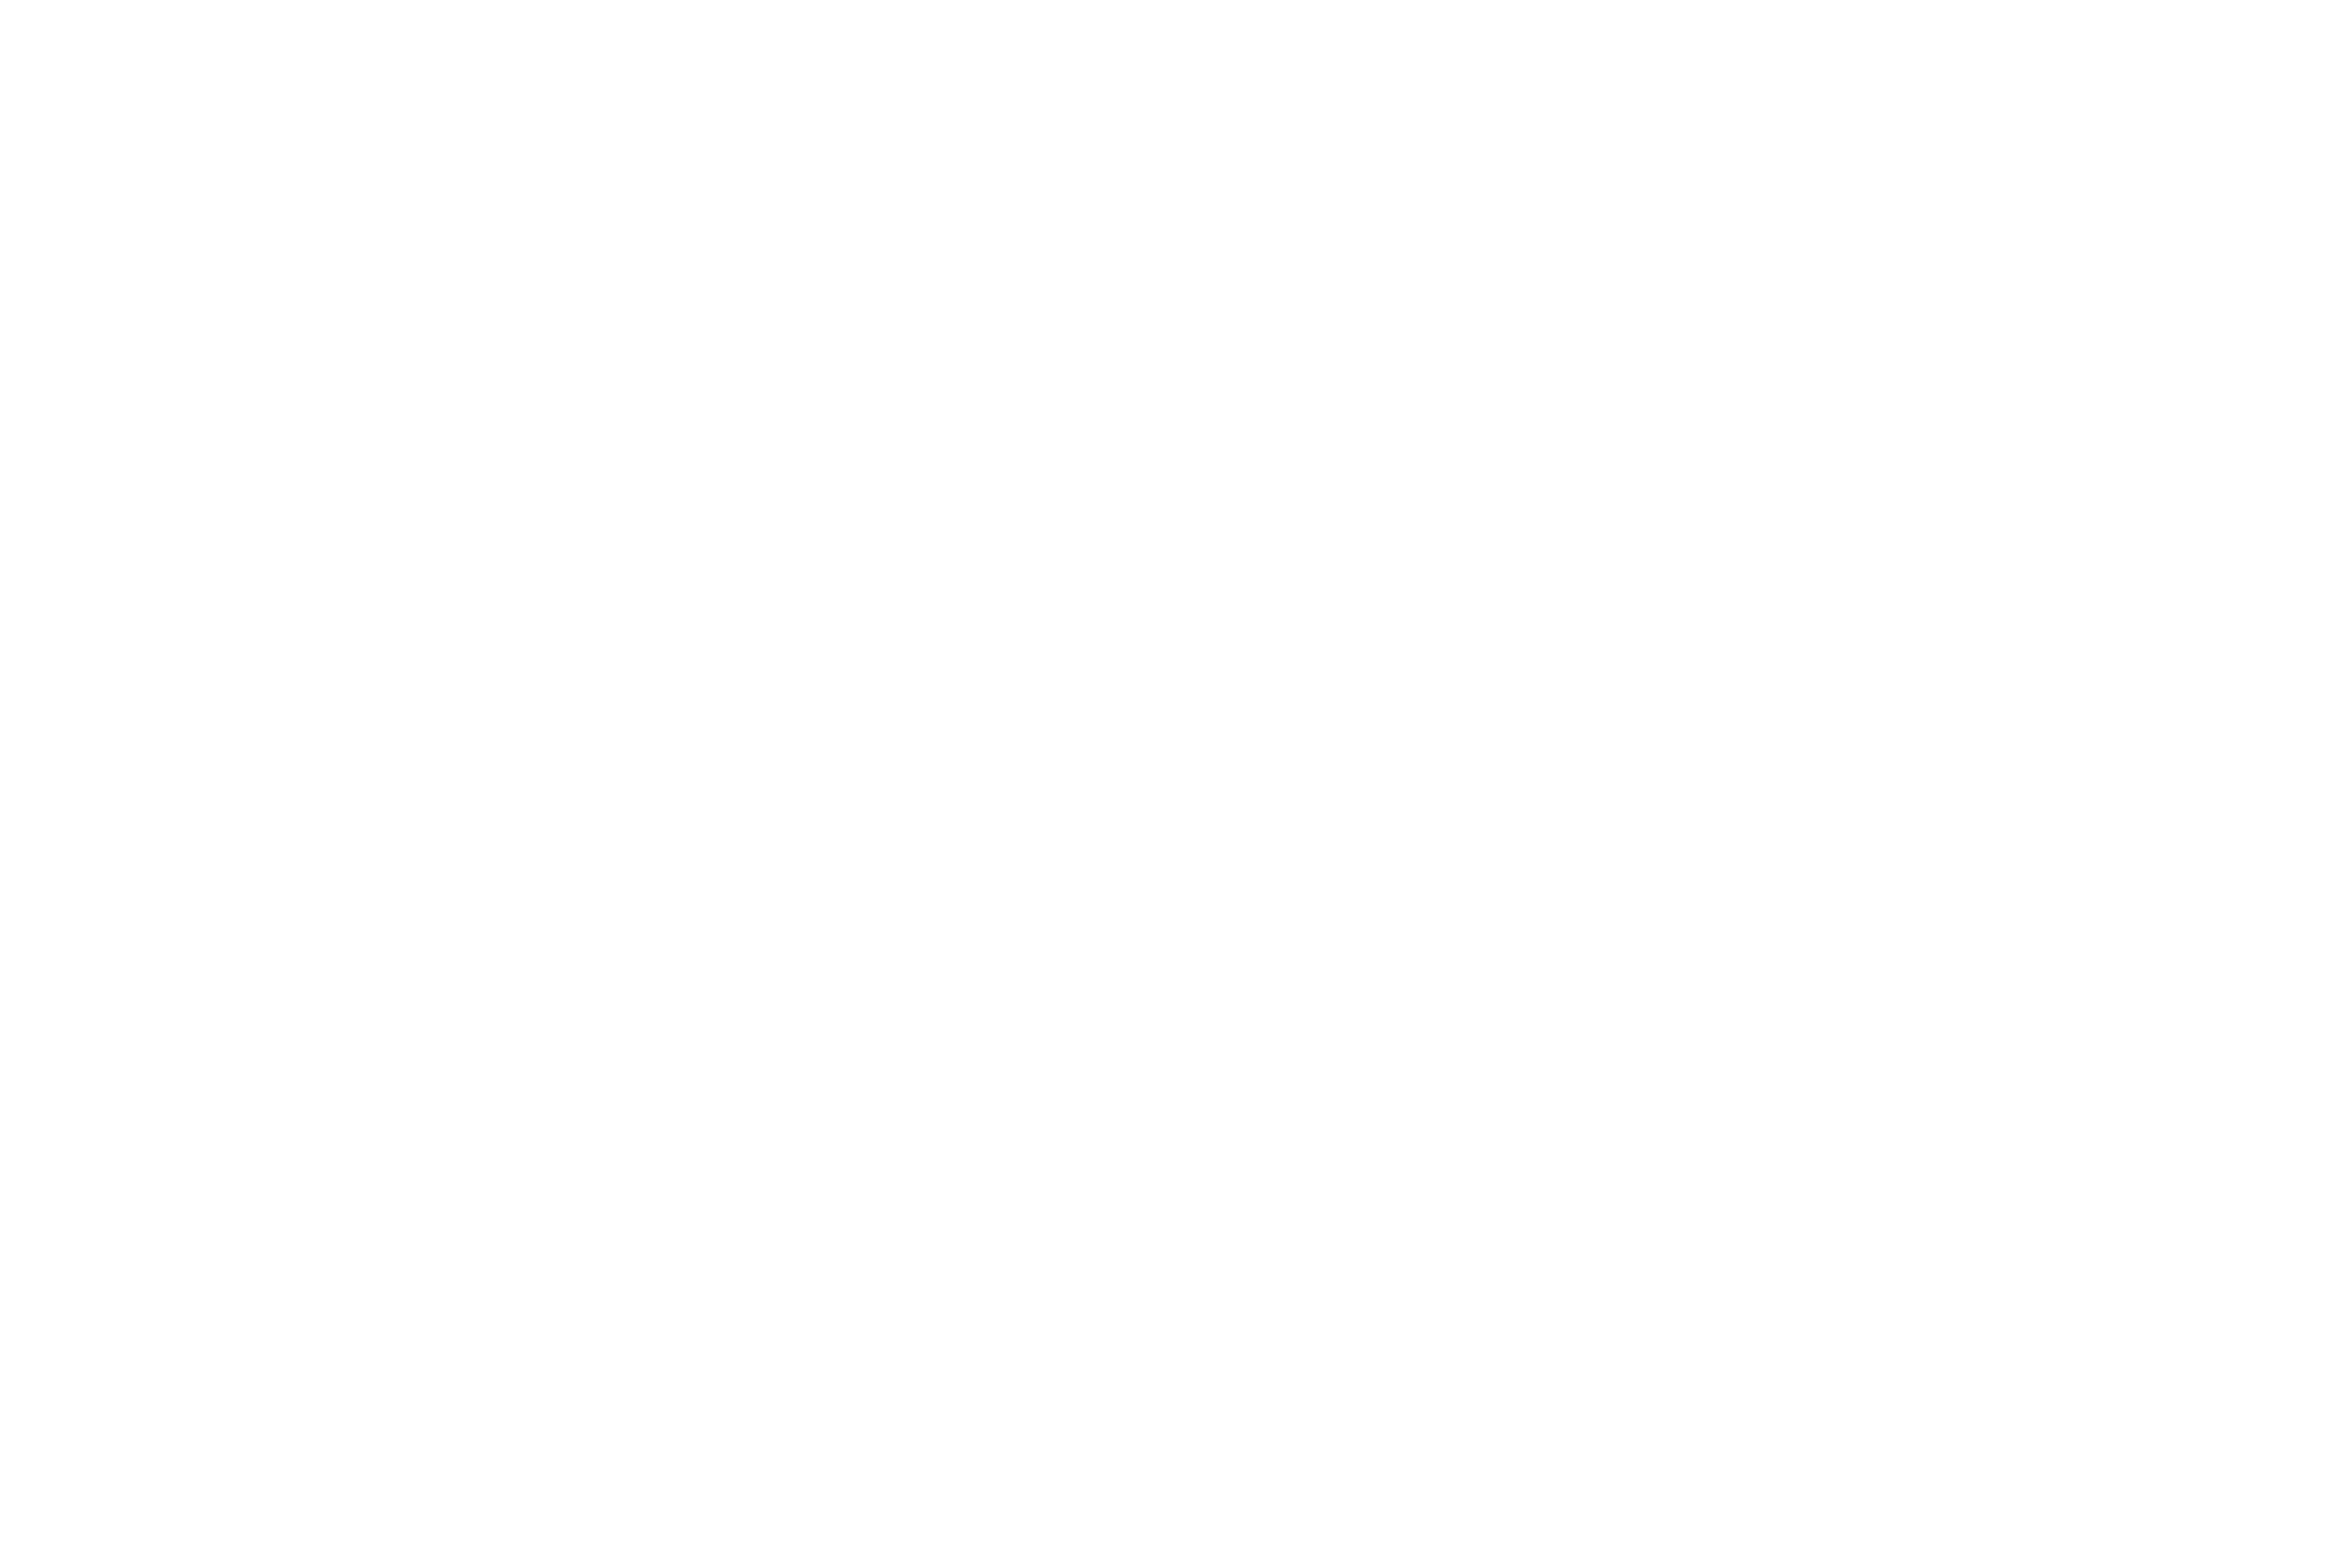 Casa Park Homes - Manufactured Homes for Sale in California and Oregon